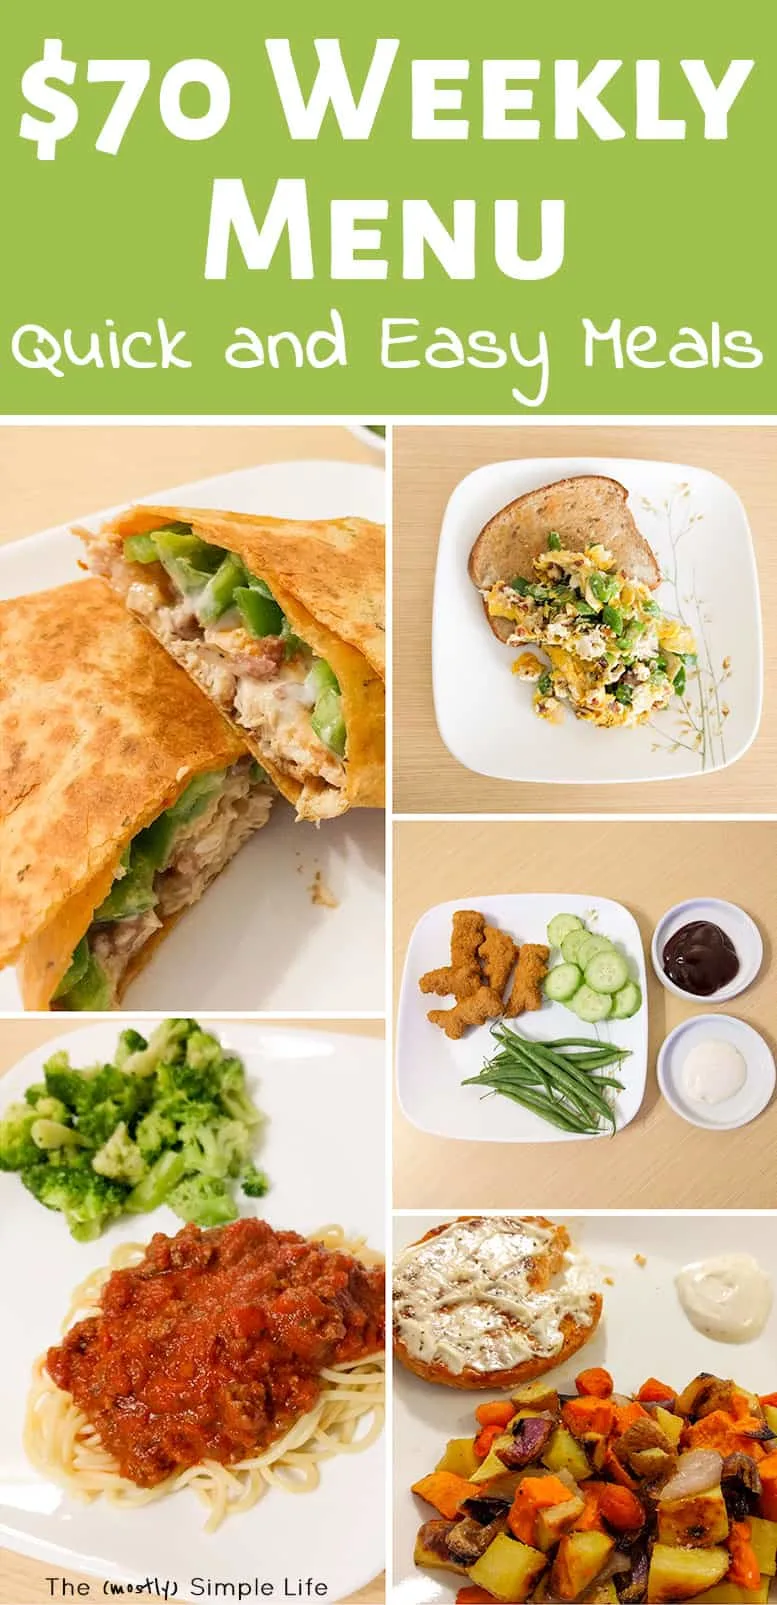 What We Eat in a Week: Our $70 Weekly Meal Plan